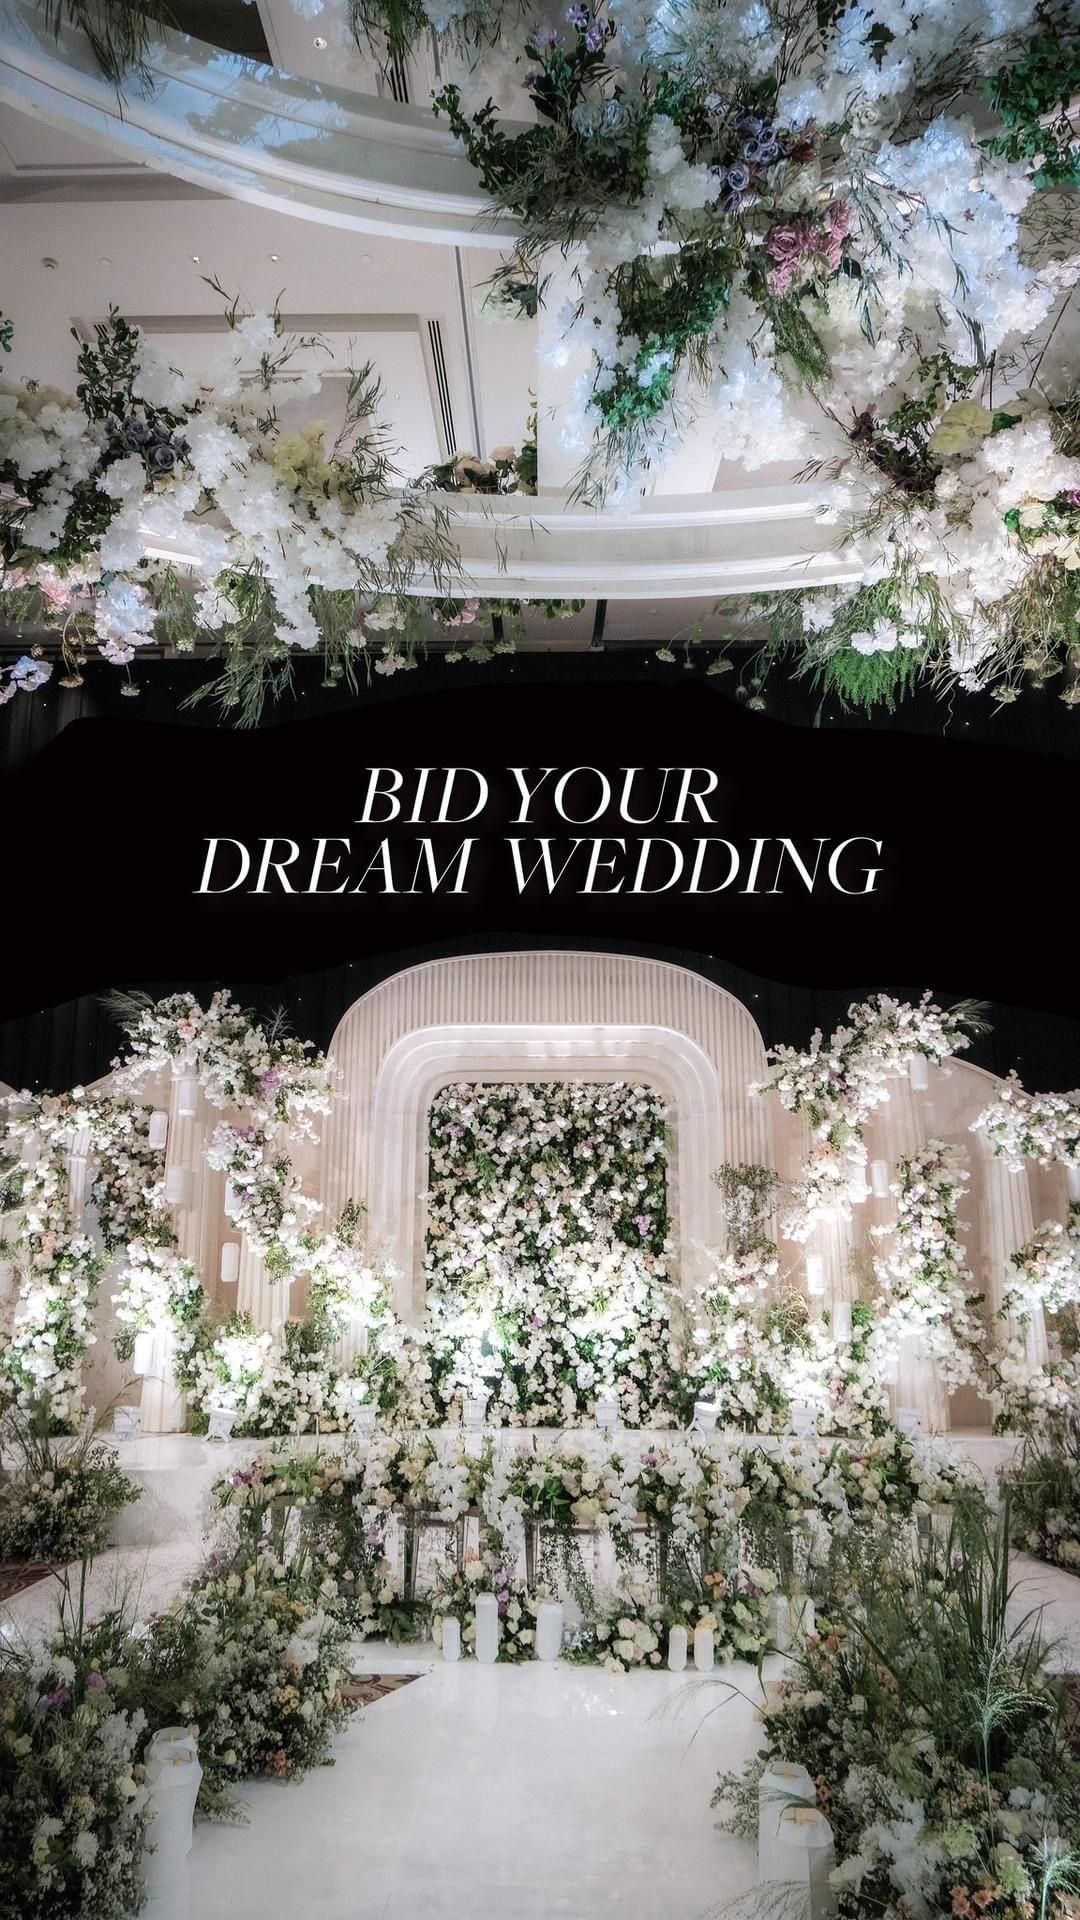 class="content__text"Embark on a journey to create your dream wedding at Fairmont Jakarta through the first-ever online wedding auction! 
Visit 𝐛𝐢𝐝𝐲𝐨𝐮𝐫𝐝𝐫𝐞𝐚𝐦𝐰𝐞𝐝𝐝𝐢𝐧𝐠.𝐜𝐨𝐦 to explore a world of possibilities. Proudly in collaboration with 𝐰𝐞𝐝𝐝𝐢𝐧𝐠𝐤𝐮.𝐜𝐨𝐦, our exclusive event is captured in a captivating video in partnership with Behind the Vows. 

Dive into the details and insights shared by our expert speakers.
Don’t miss out on this unique opportunity to bid for your dream wedding experience! 

#BidYourDreamWedding #FairmontJakarta #WeddingAuction #DreamWedding”